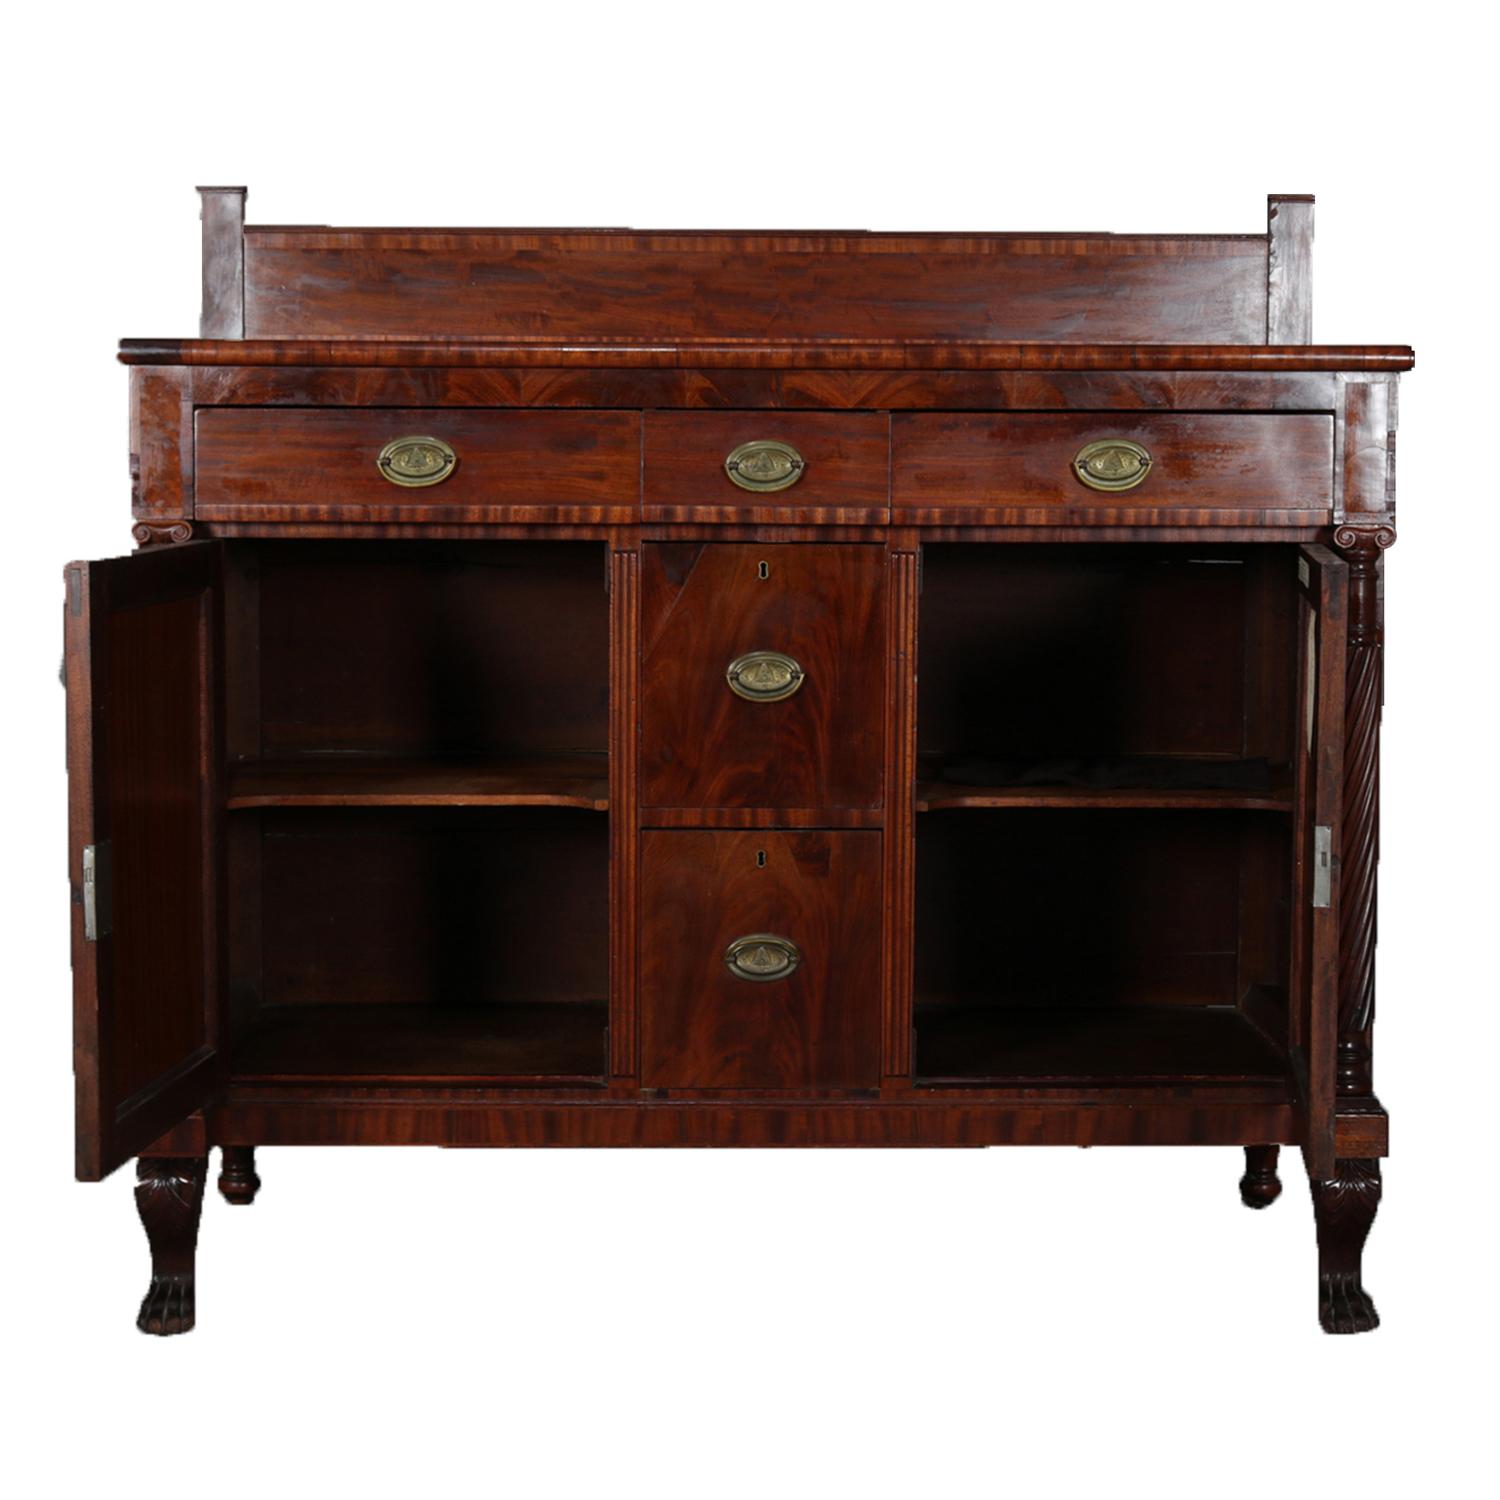 An antique American Empire mahogany sideboard features flame mahogany construction with crossbanded backsplash surmounting case having lined silver drawer, central drawer and velvet lined divided drawer over two stacked central drawers flanked by